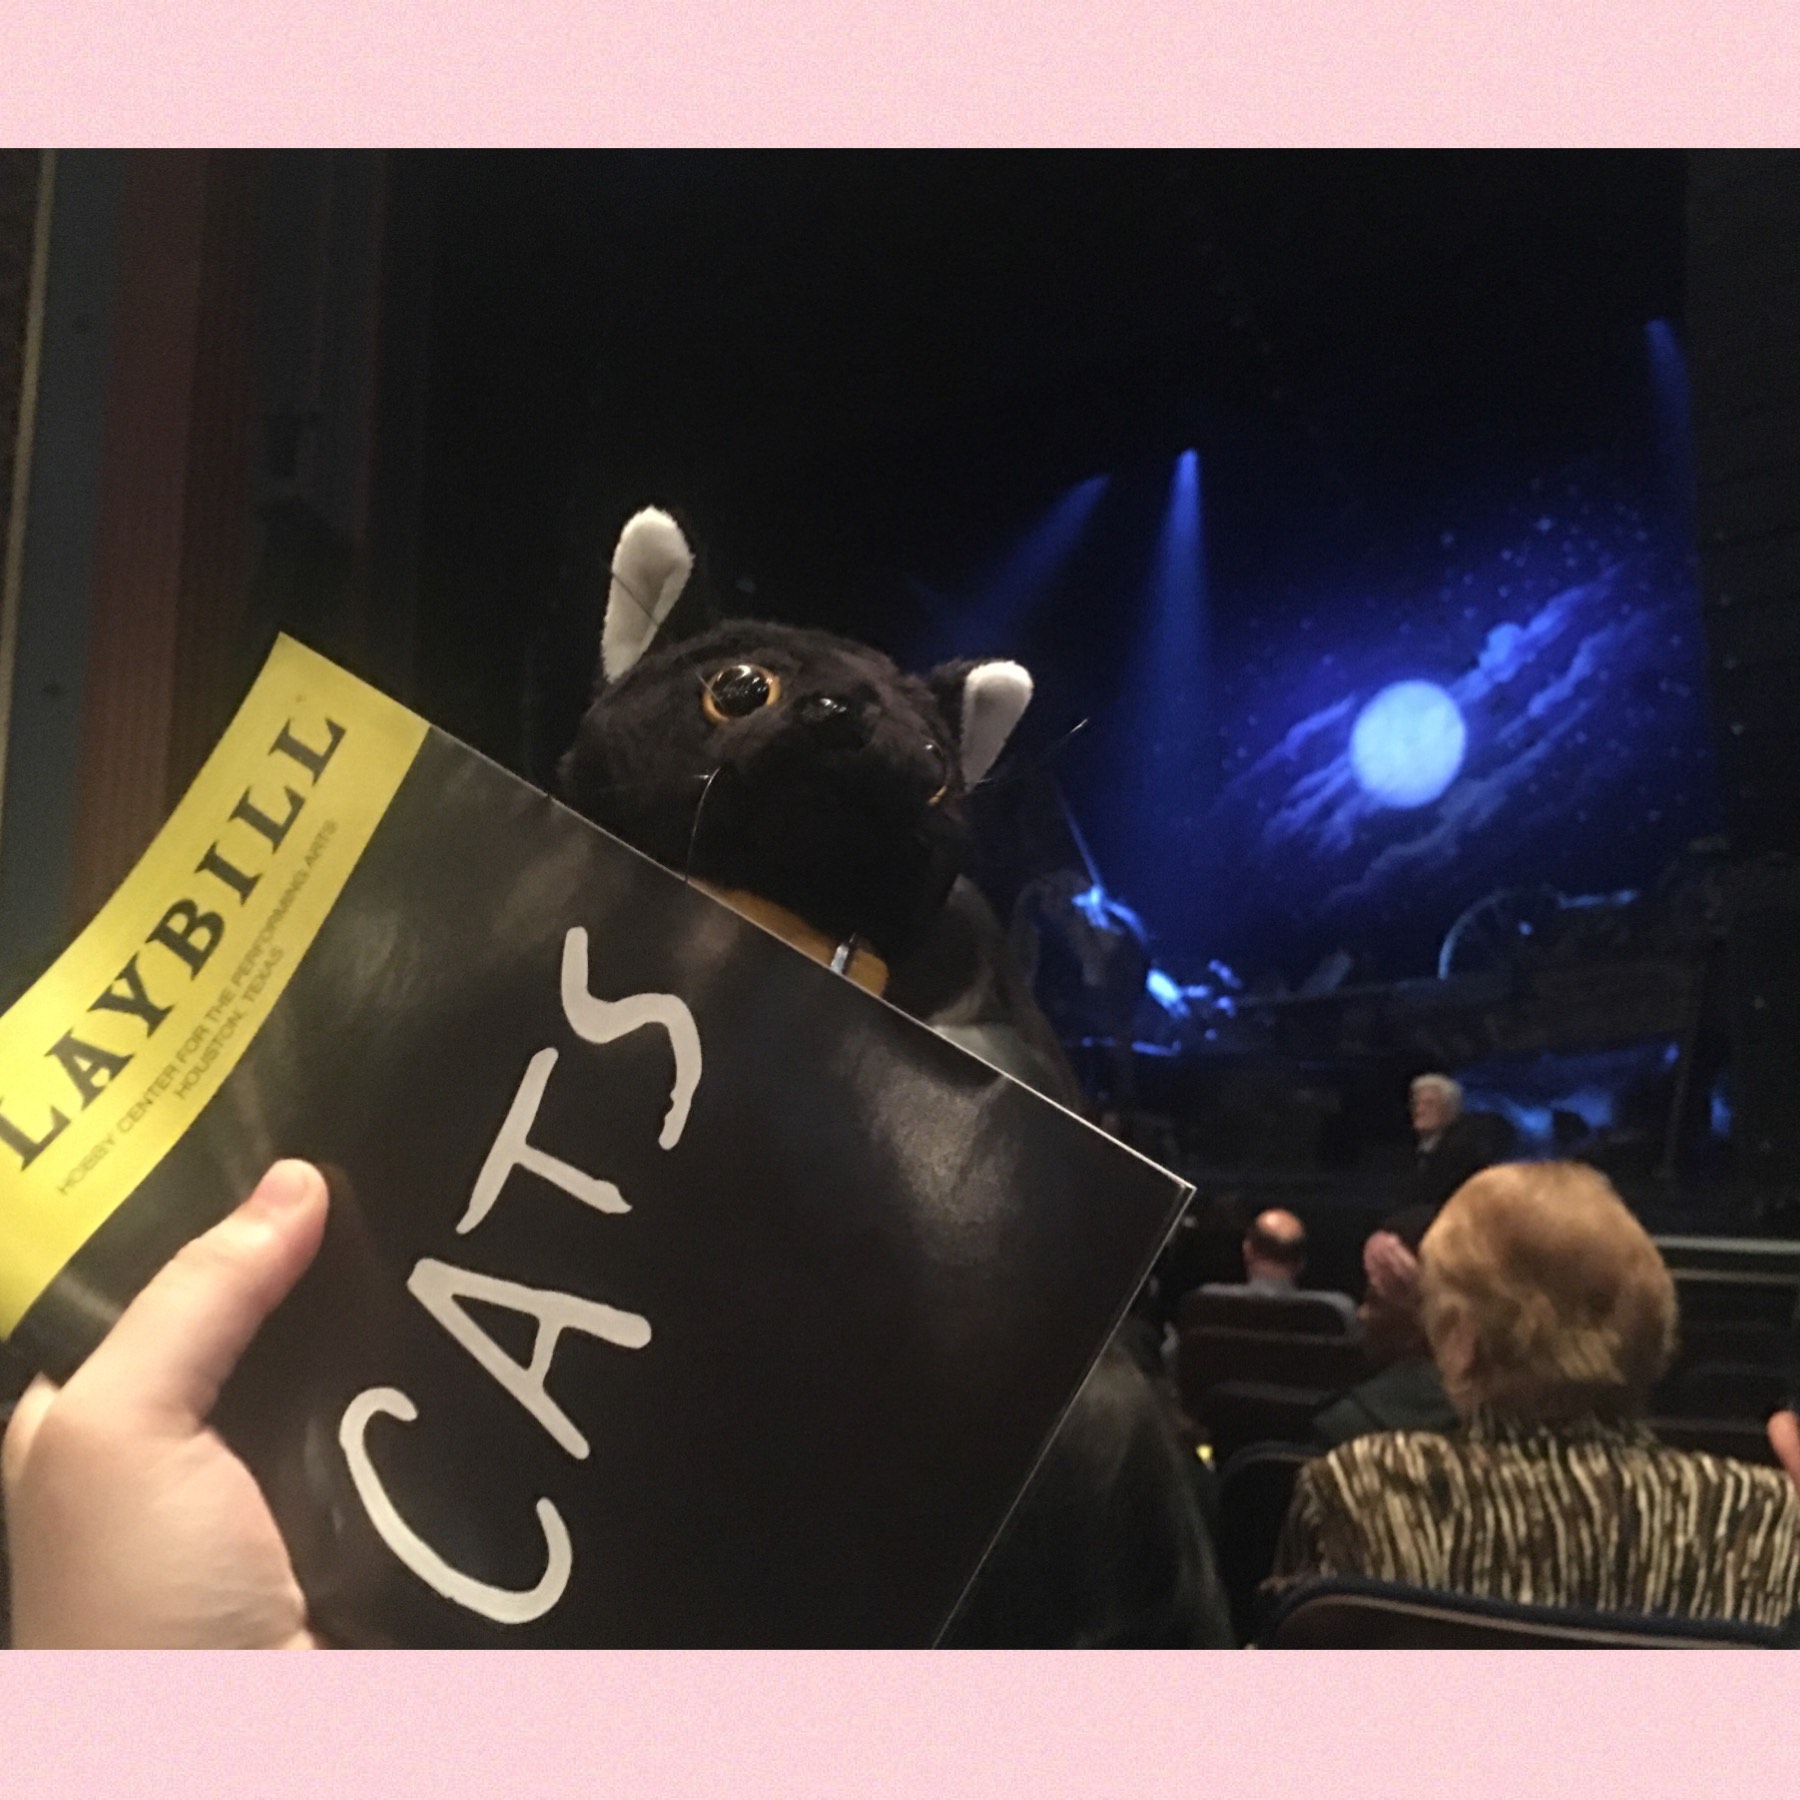 I saw cats and now I’m h0rñ y 